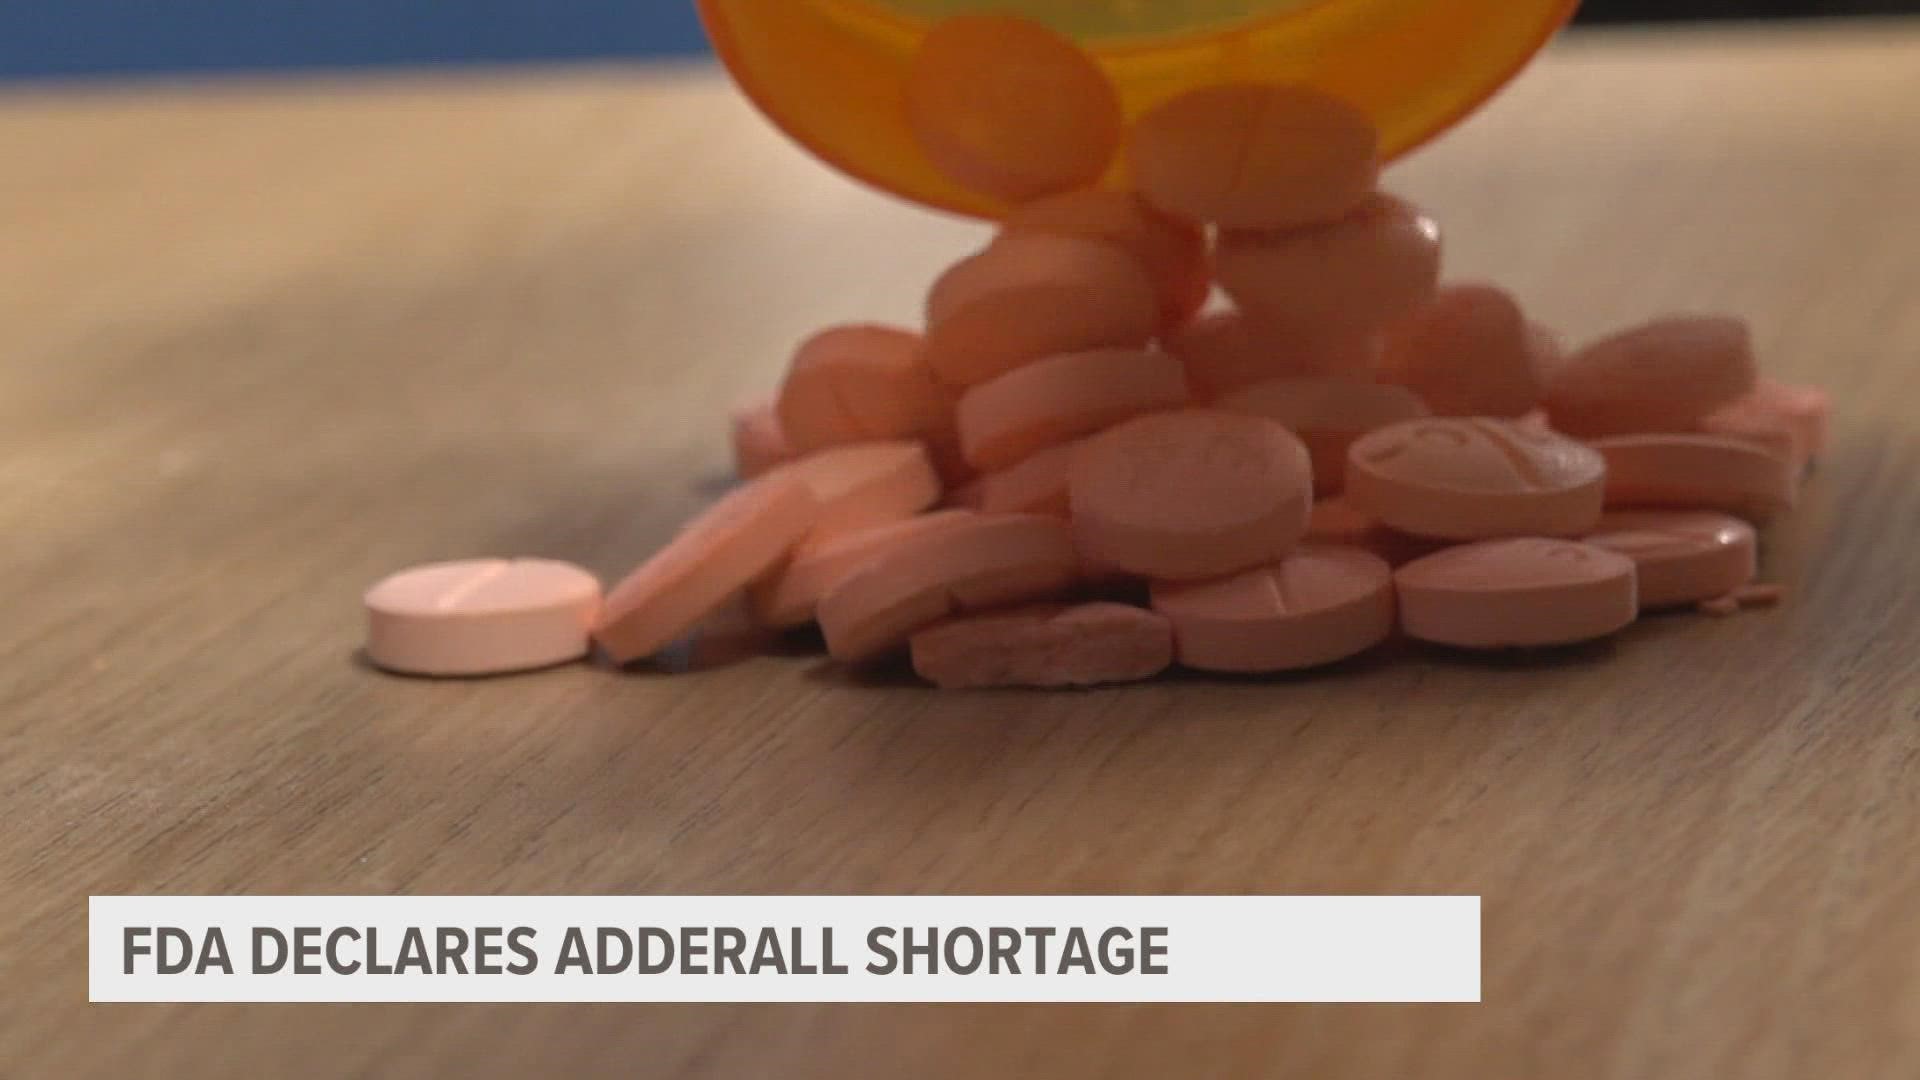 The FDA declared a national Adderall shortage. Here's what that means